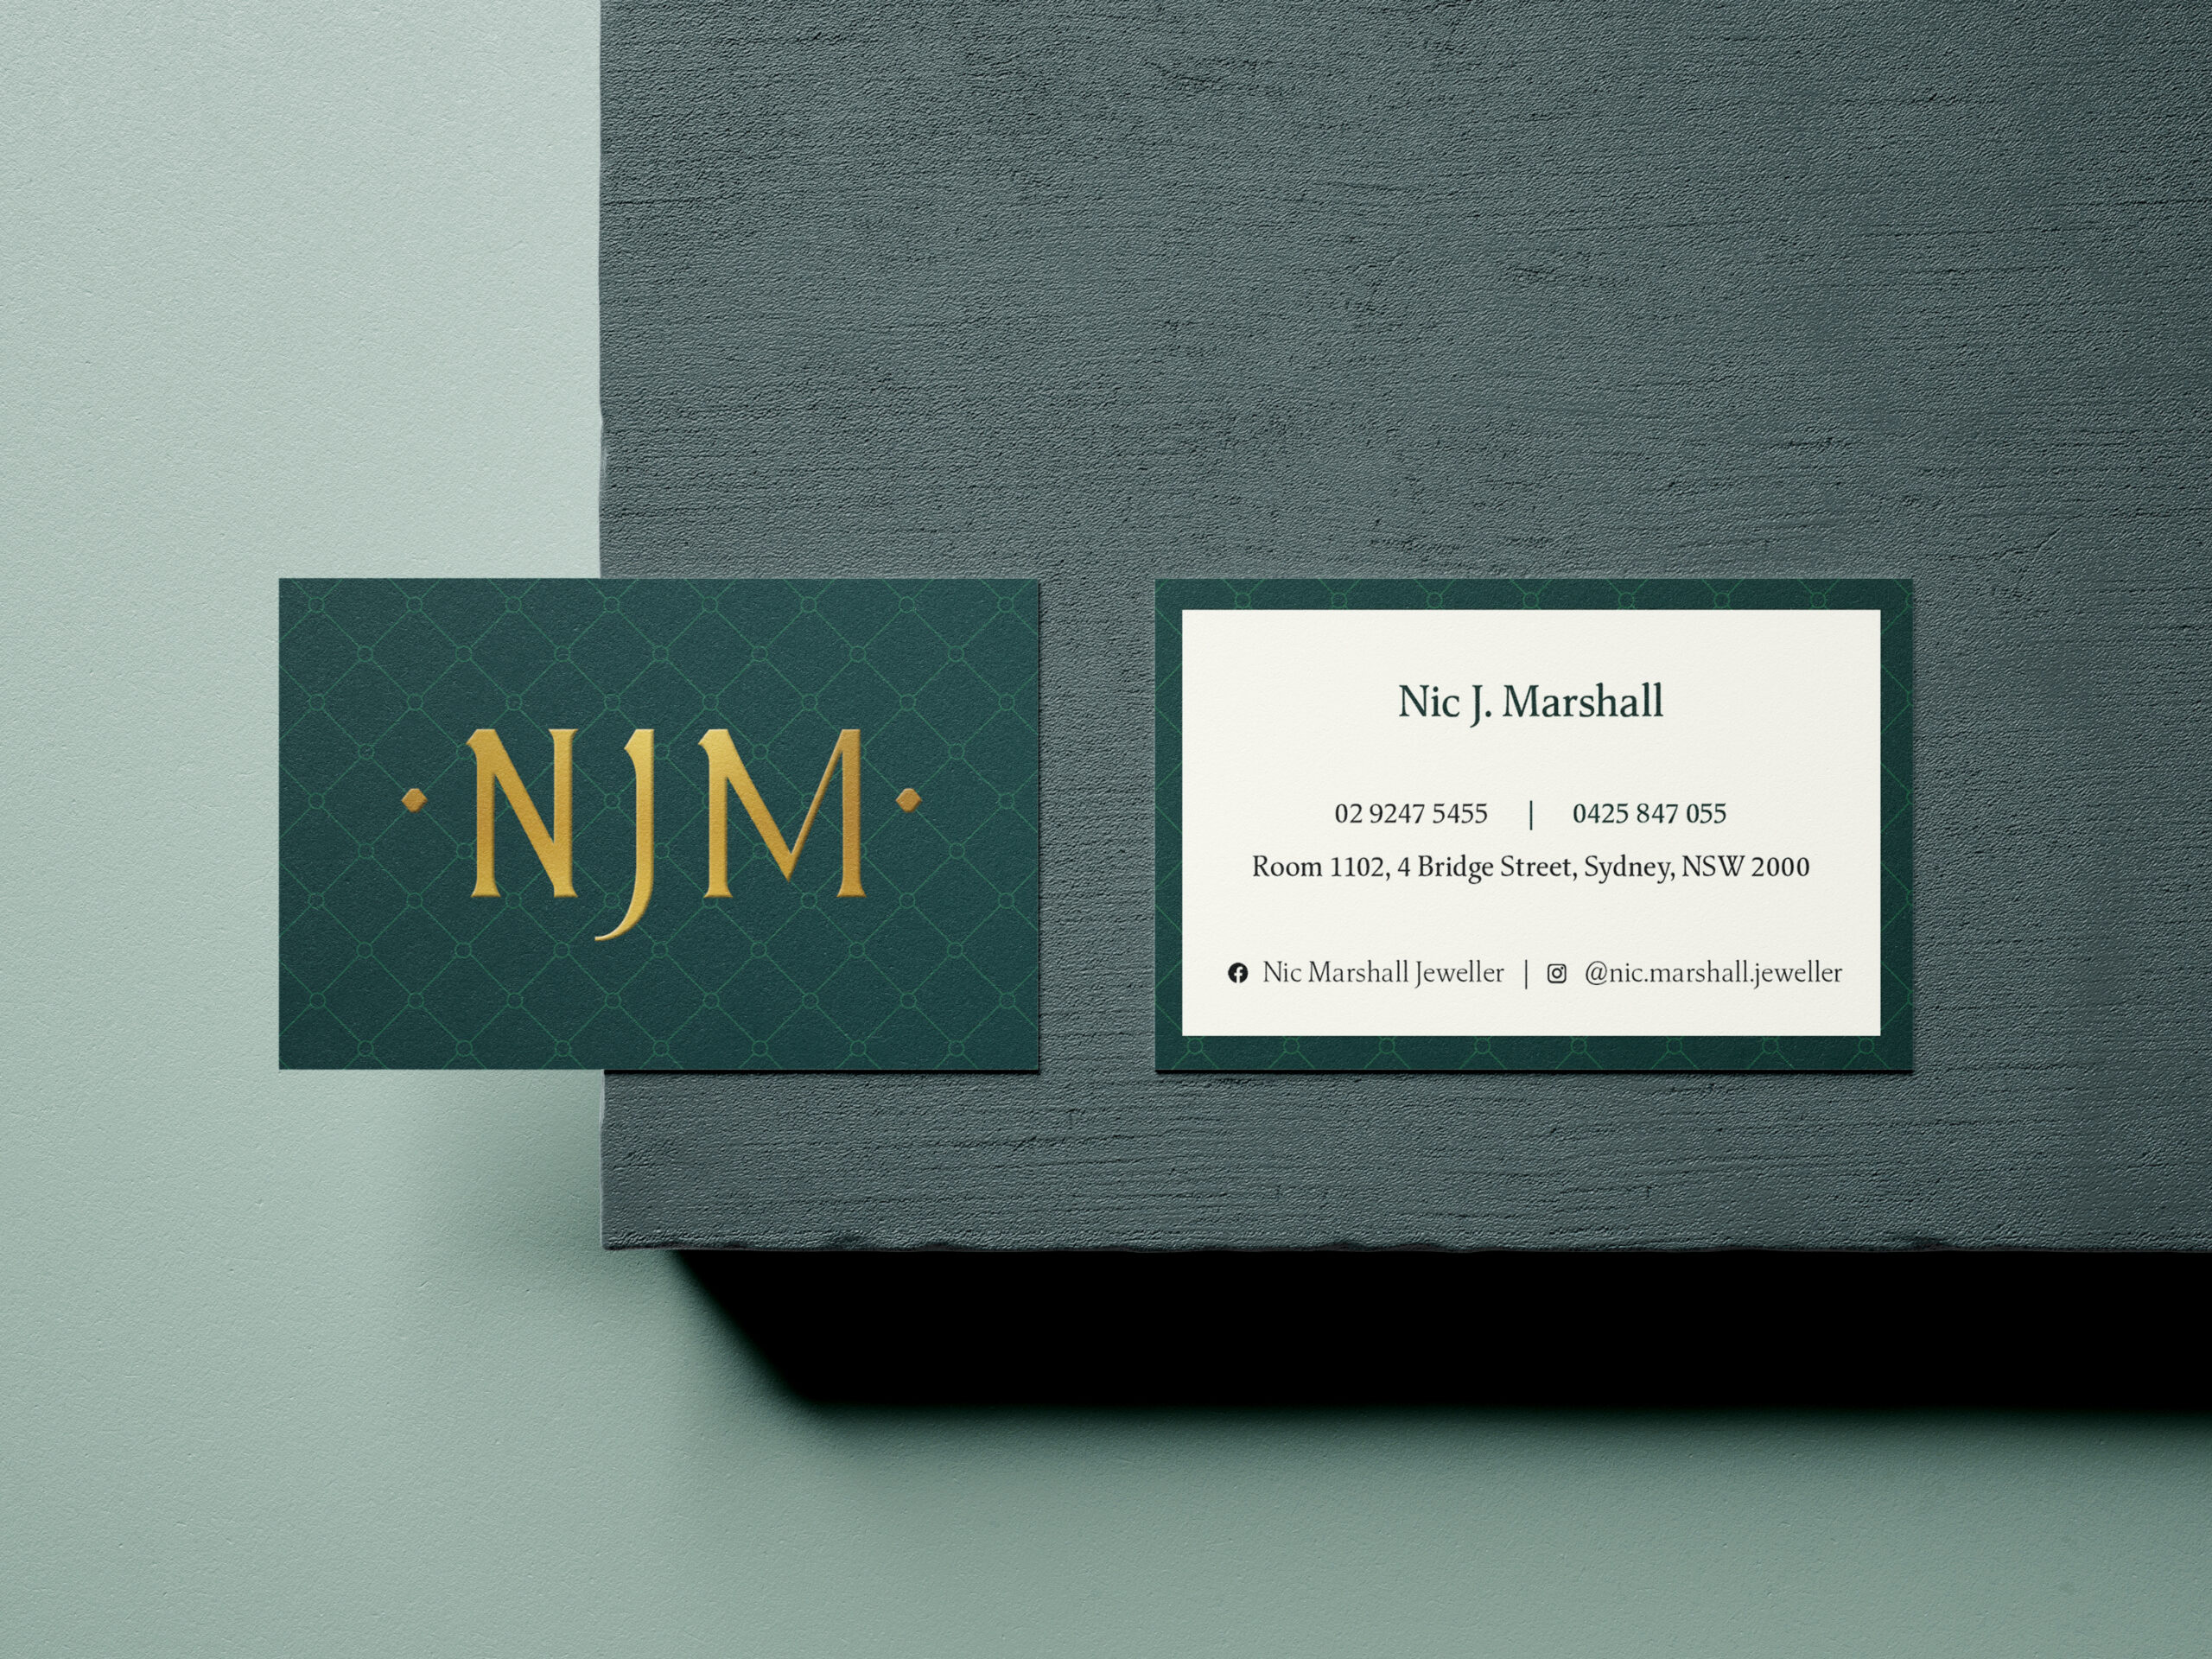 NJM business cards front and back, side by side